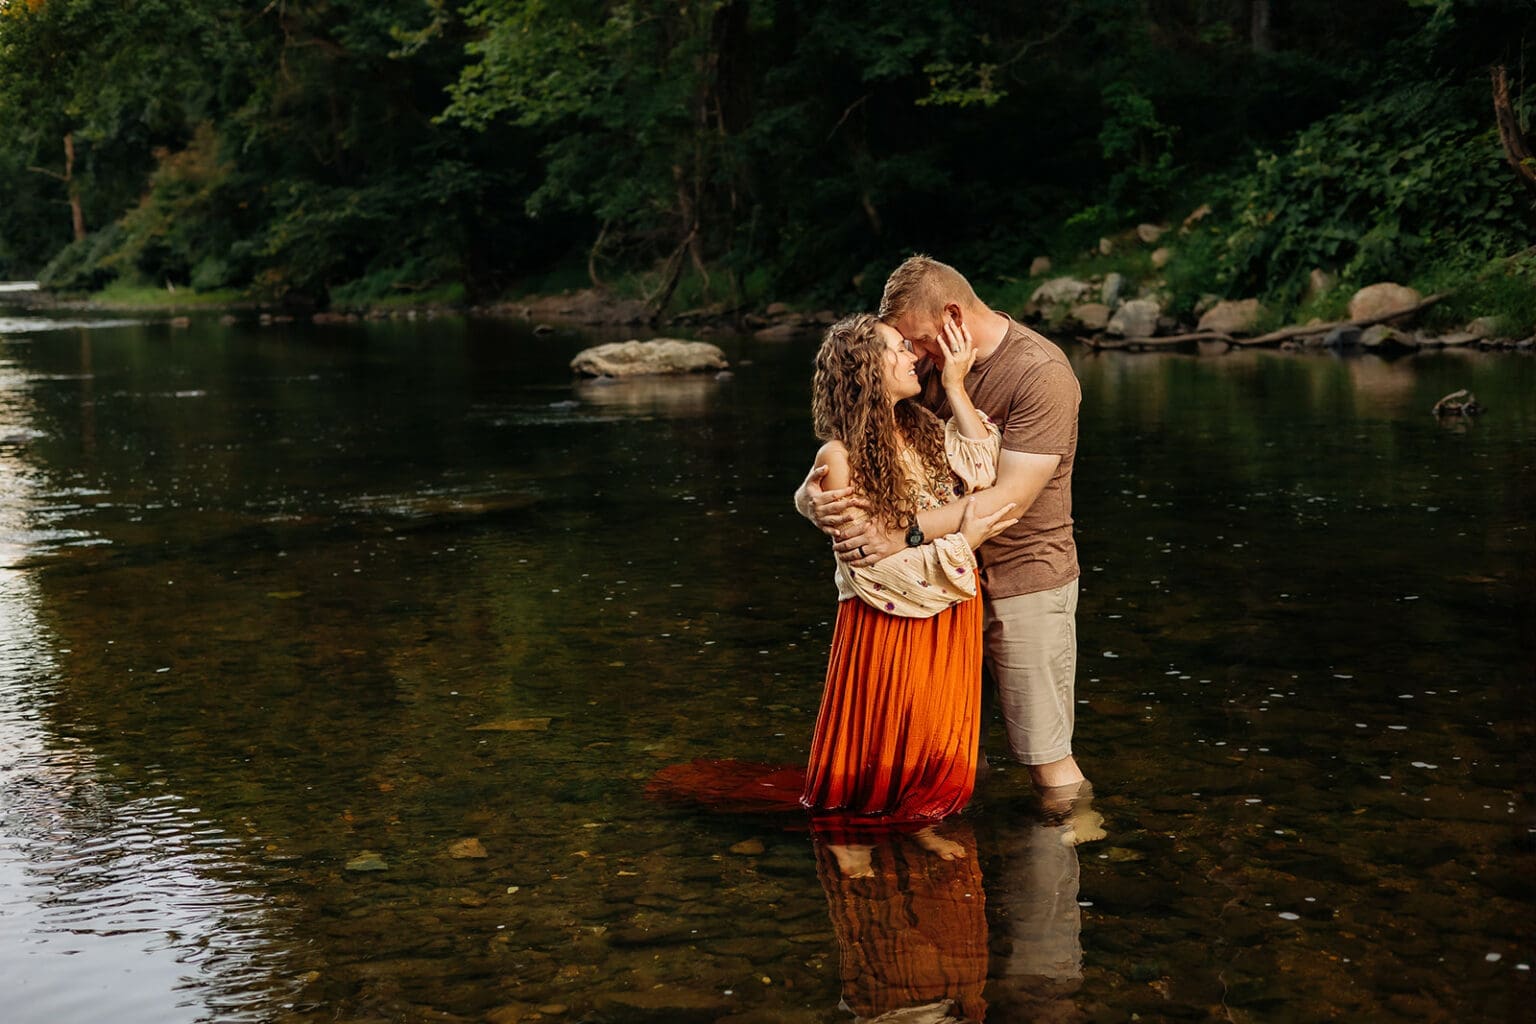 Romantic couple embracing in the river, reflecting a quiet moment of intimacy surrounded by nature, ideal for couples' lifestyle photography.